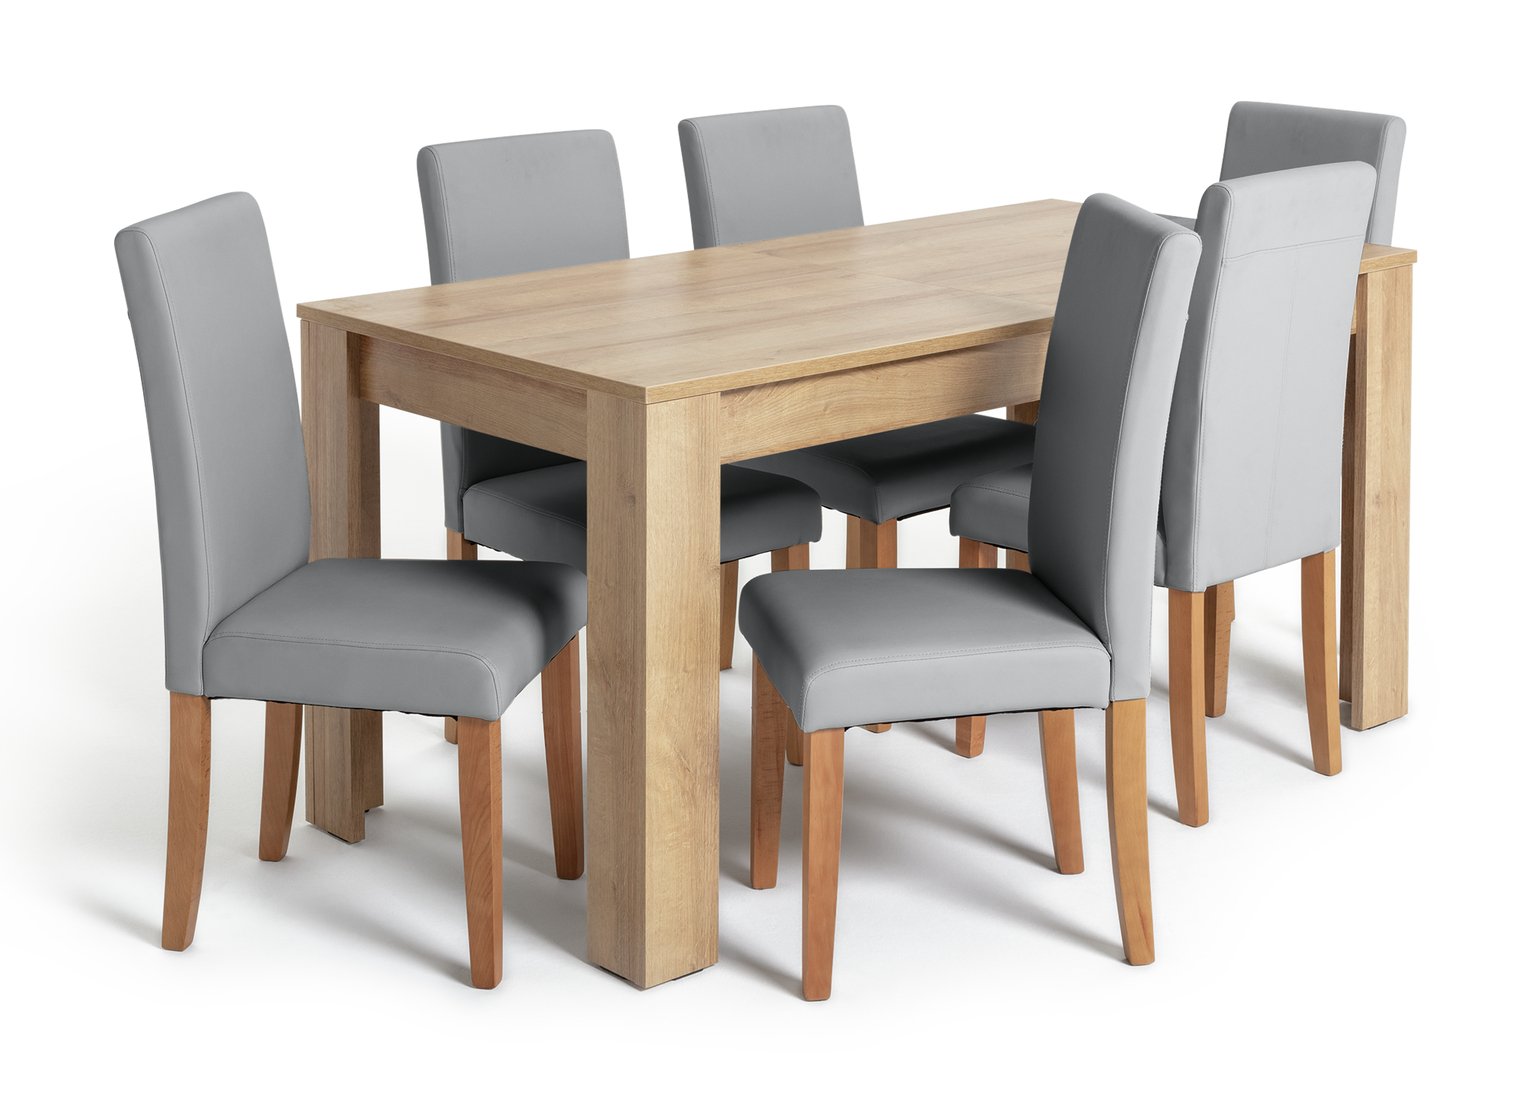 argos table and chairs for kids